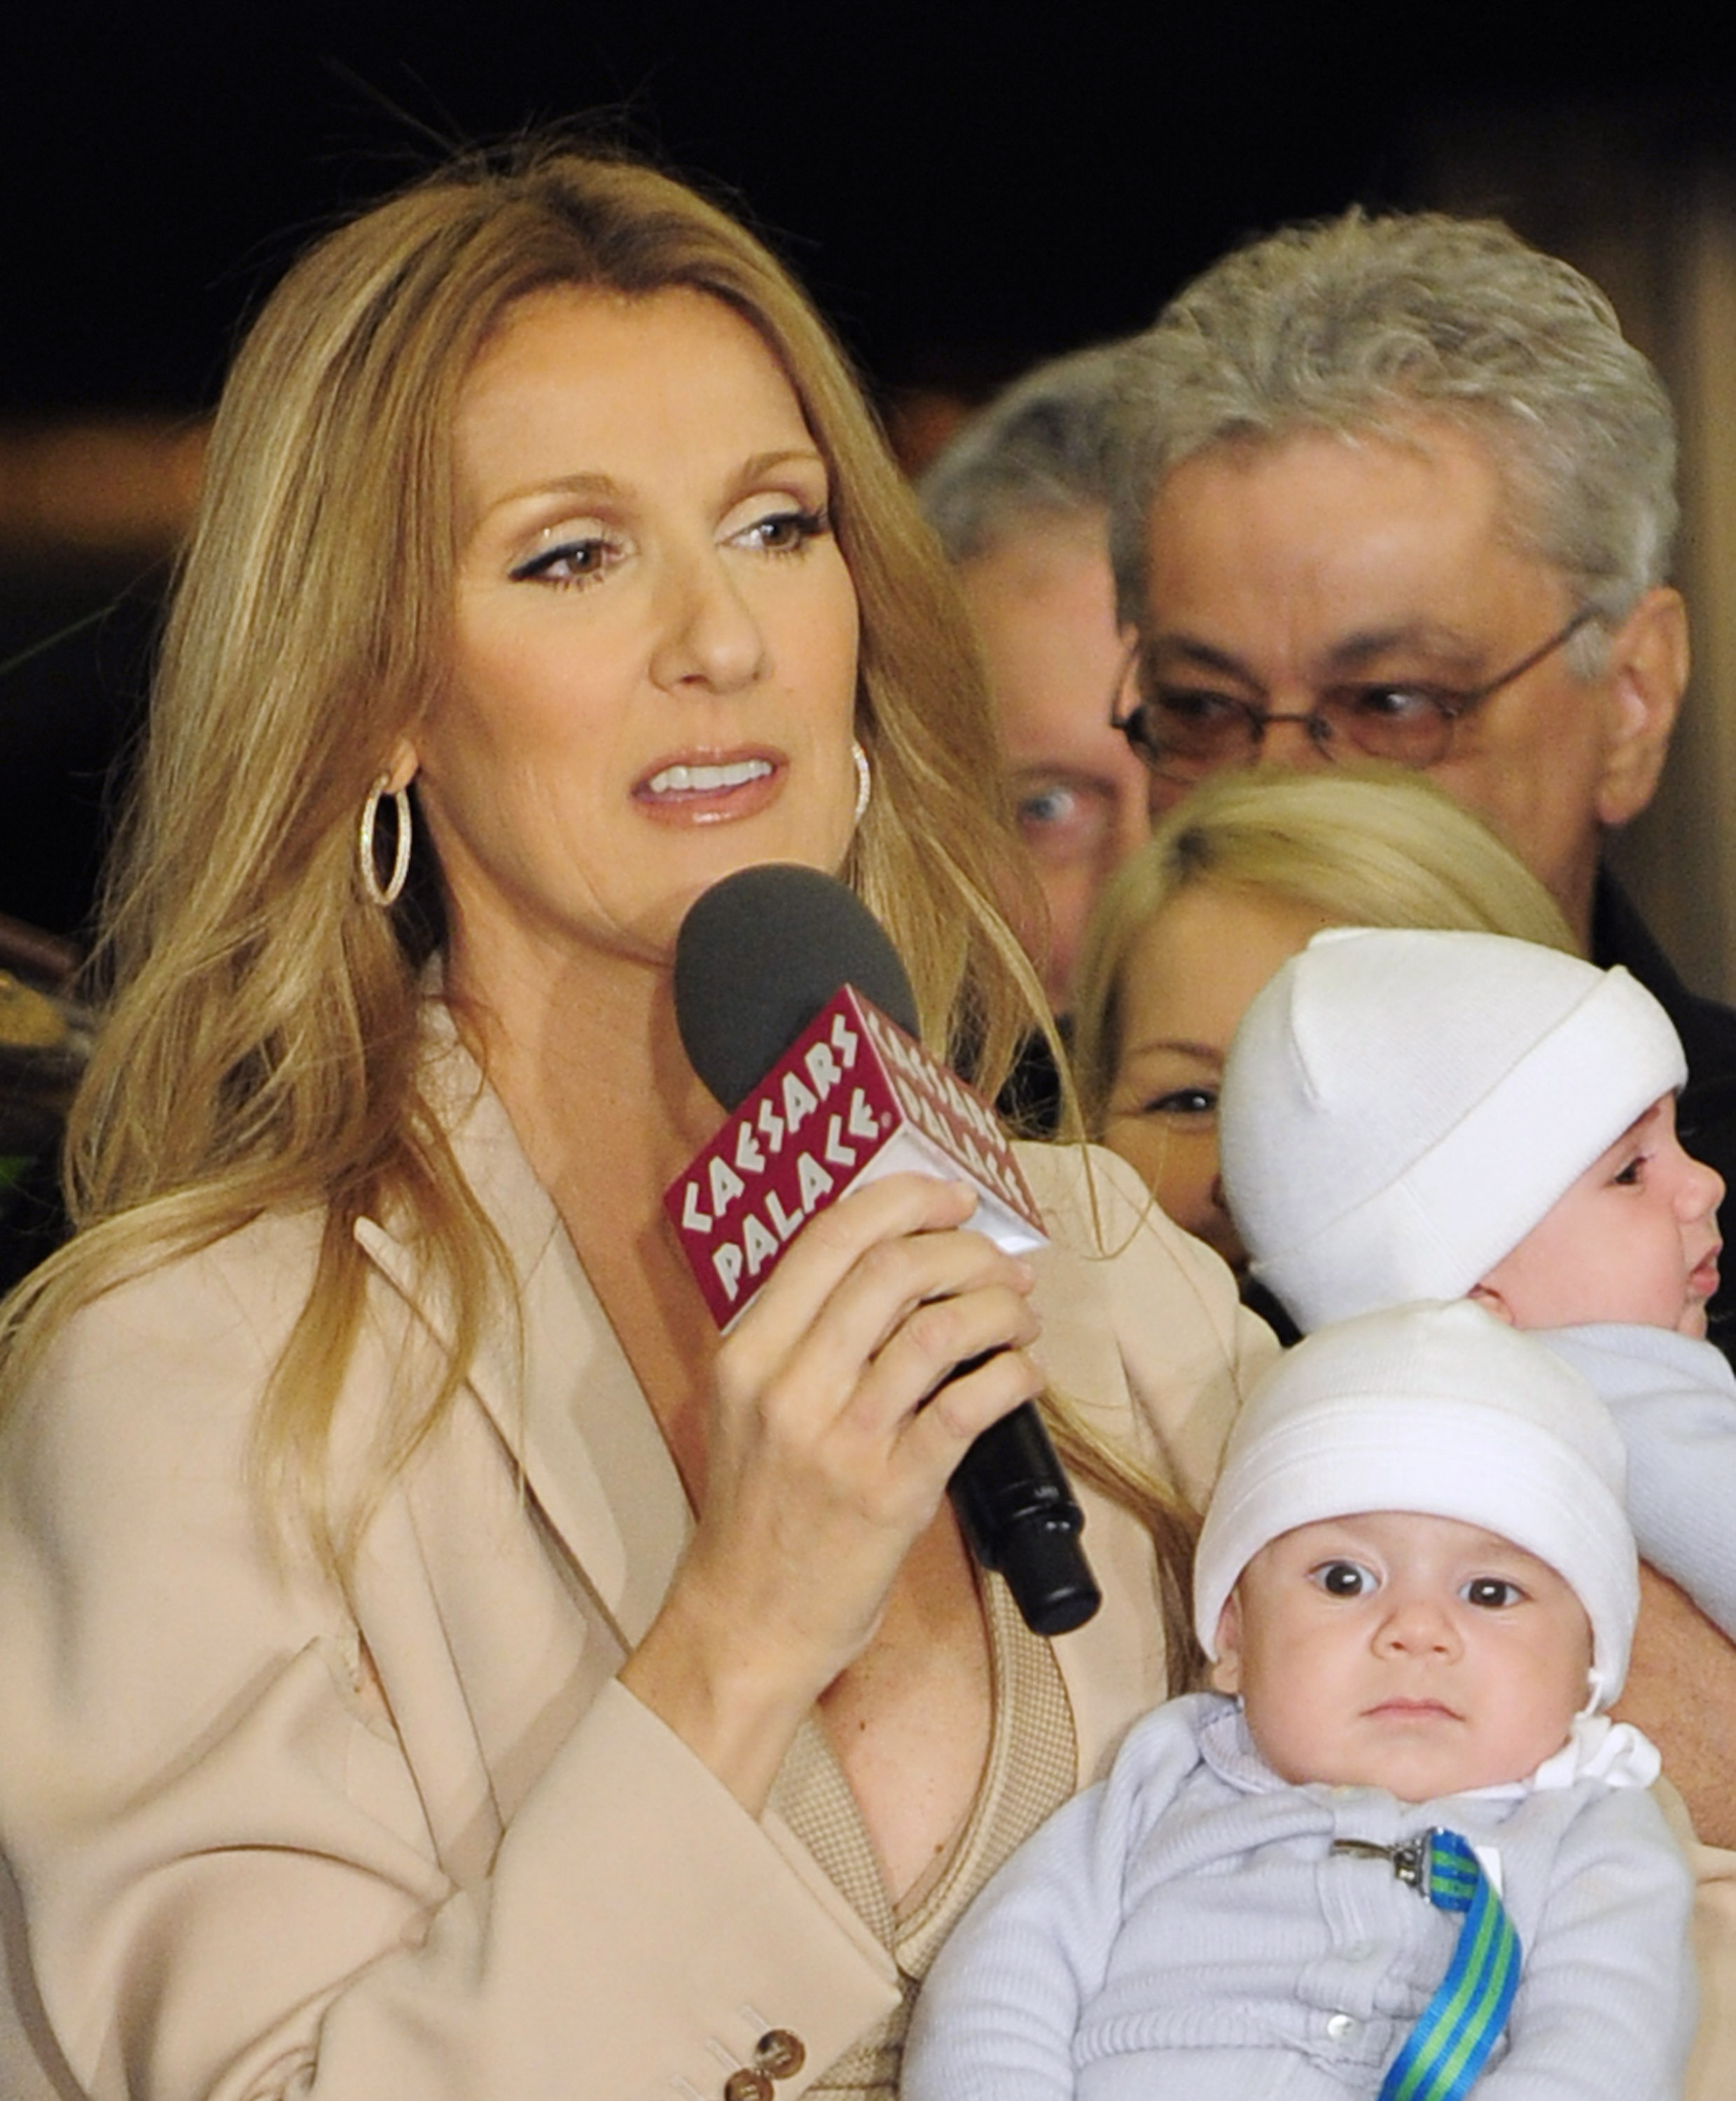 Celine Dion and her twins, Nelson and Eddy Angélil at Caesars Palace in Las Vegas, 2011 | Source: Getty Images